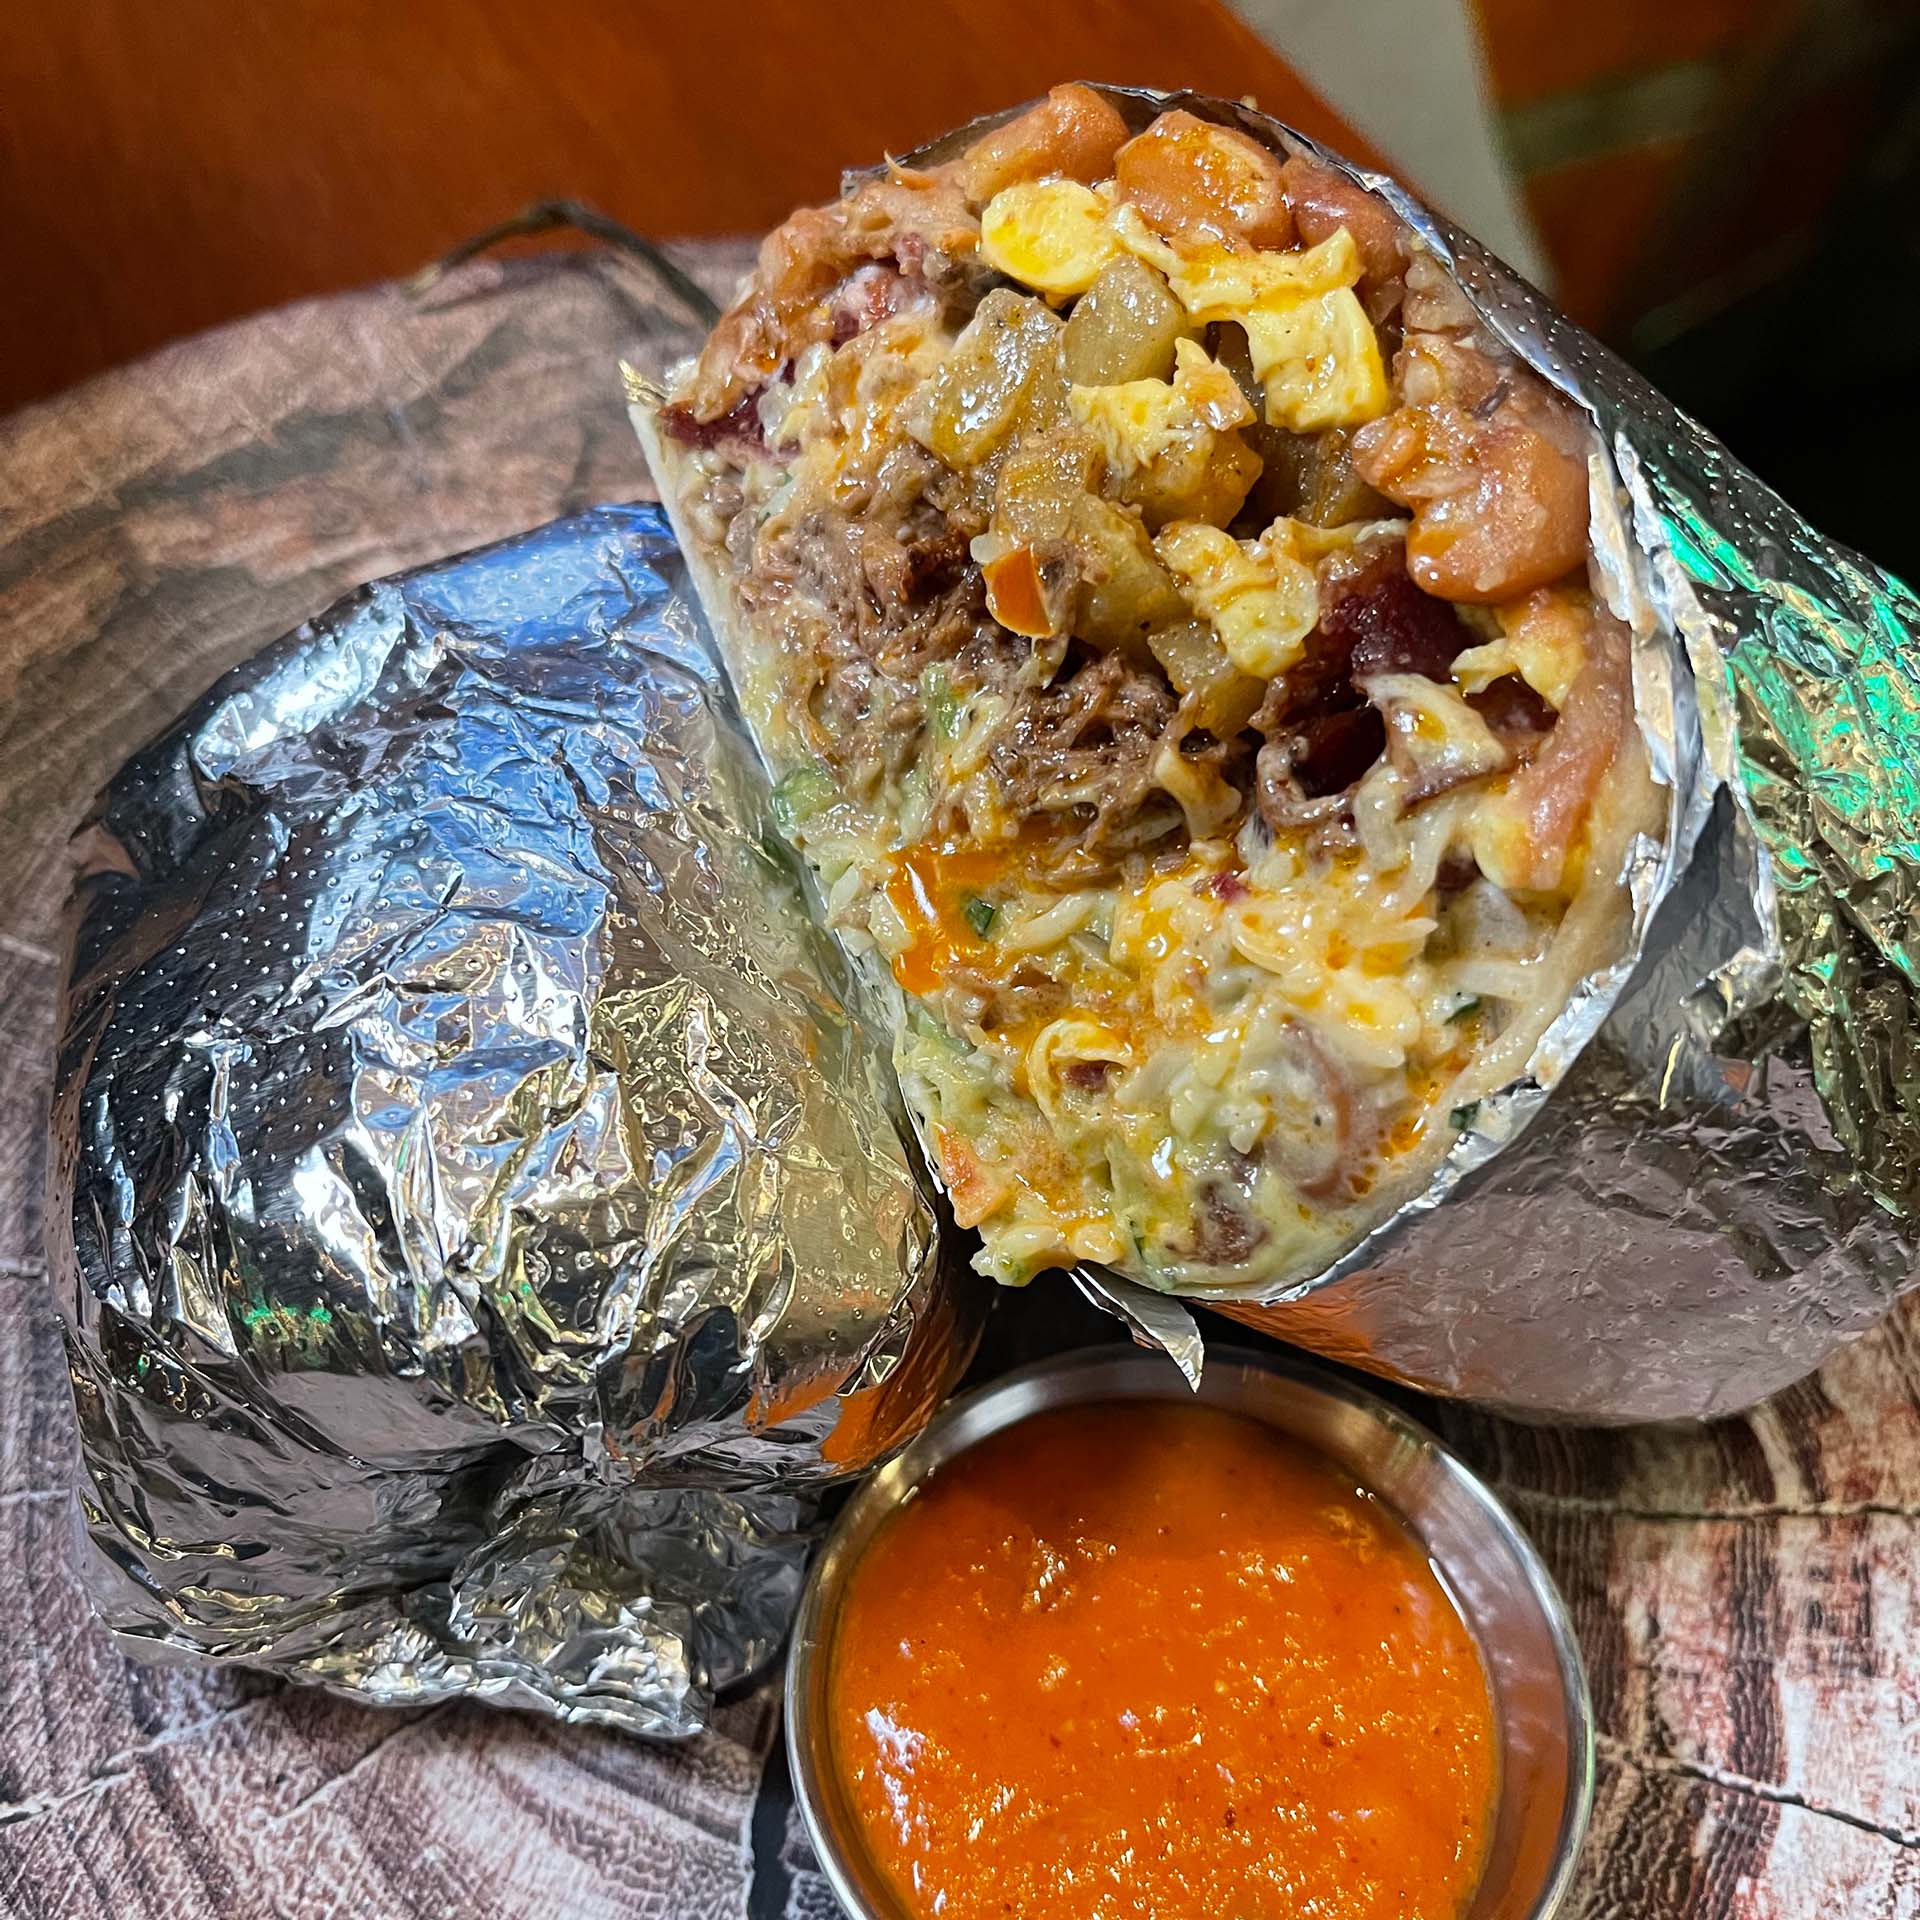 Foil-wrapped breakfast burrito cut in half to show its cheesy interior. A tub of orange salsa on the side.